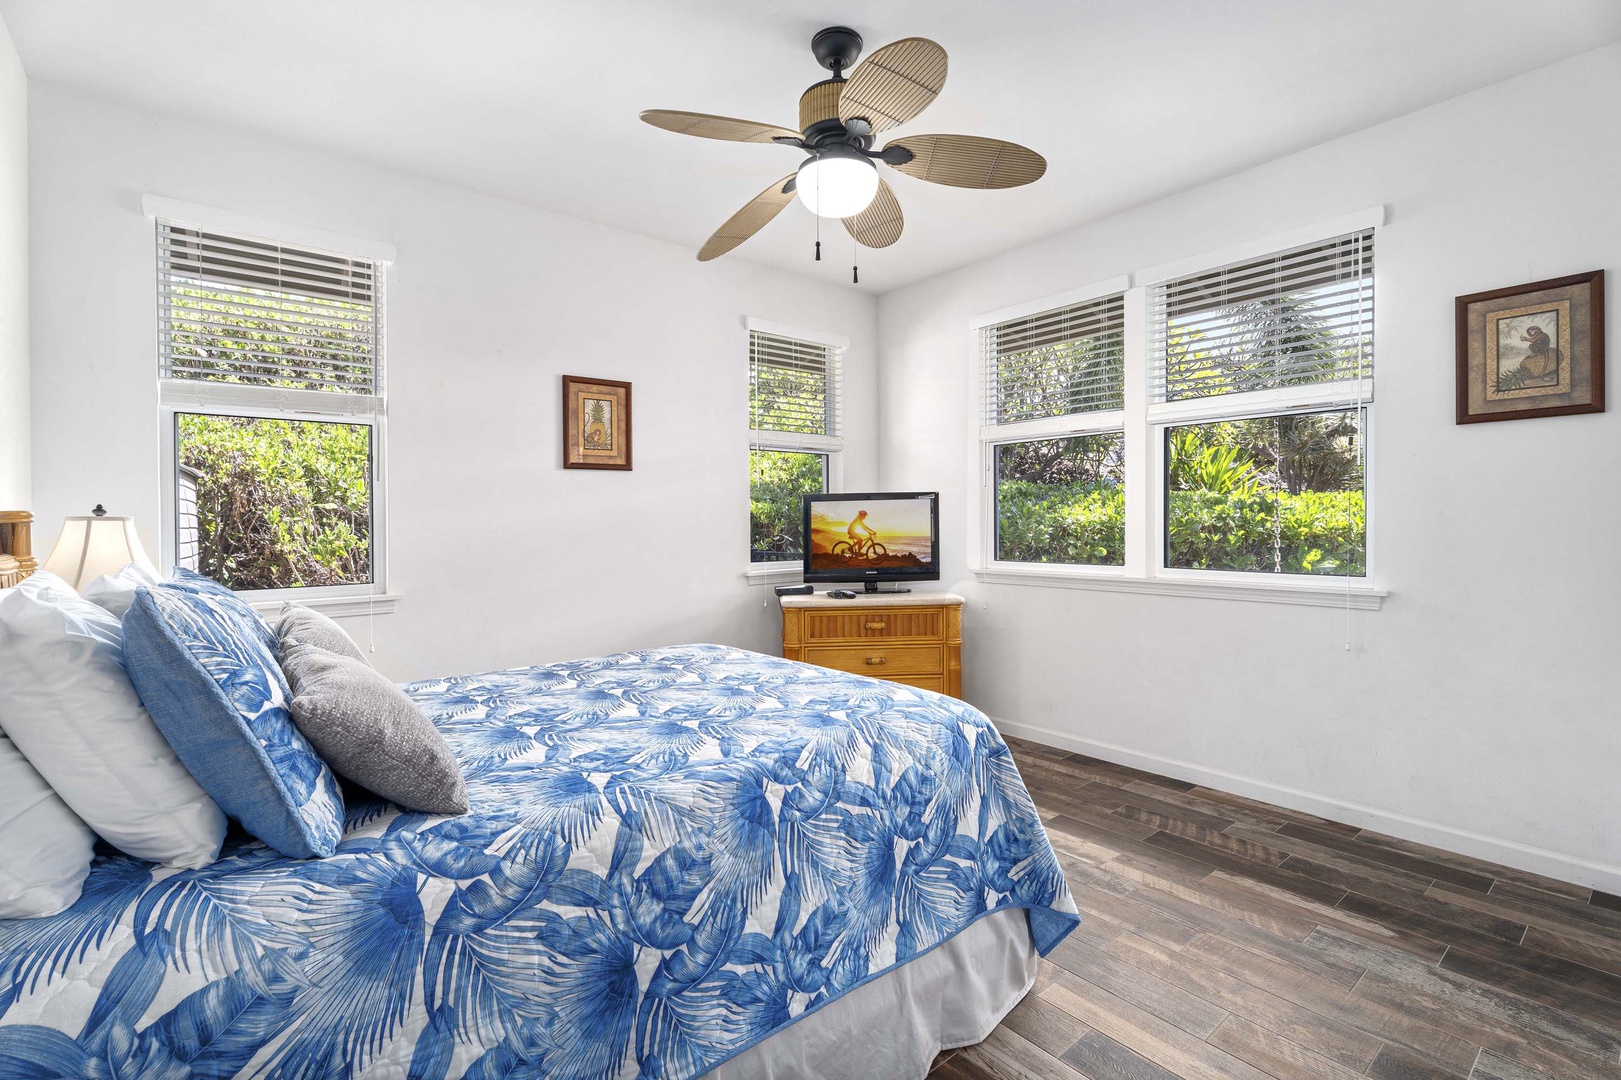 Kailua Kona Vacation Rentals, Kahakai Estates Hale - Stay entertained and inspired in our guest suite 1, offering TV luxury and window wonders.